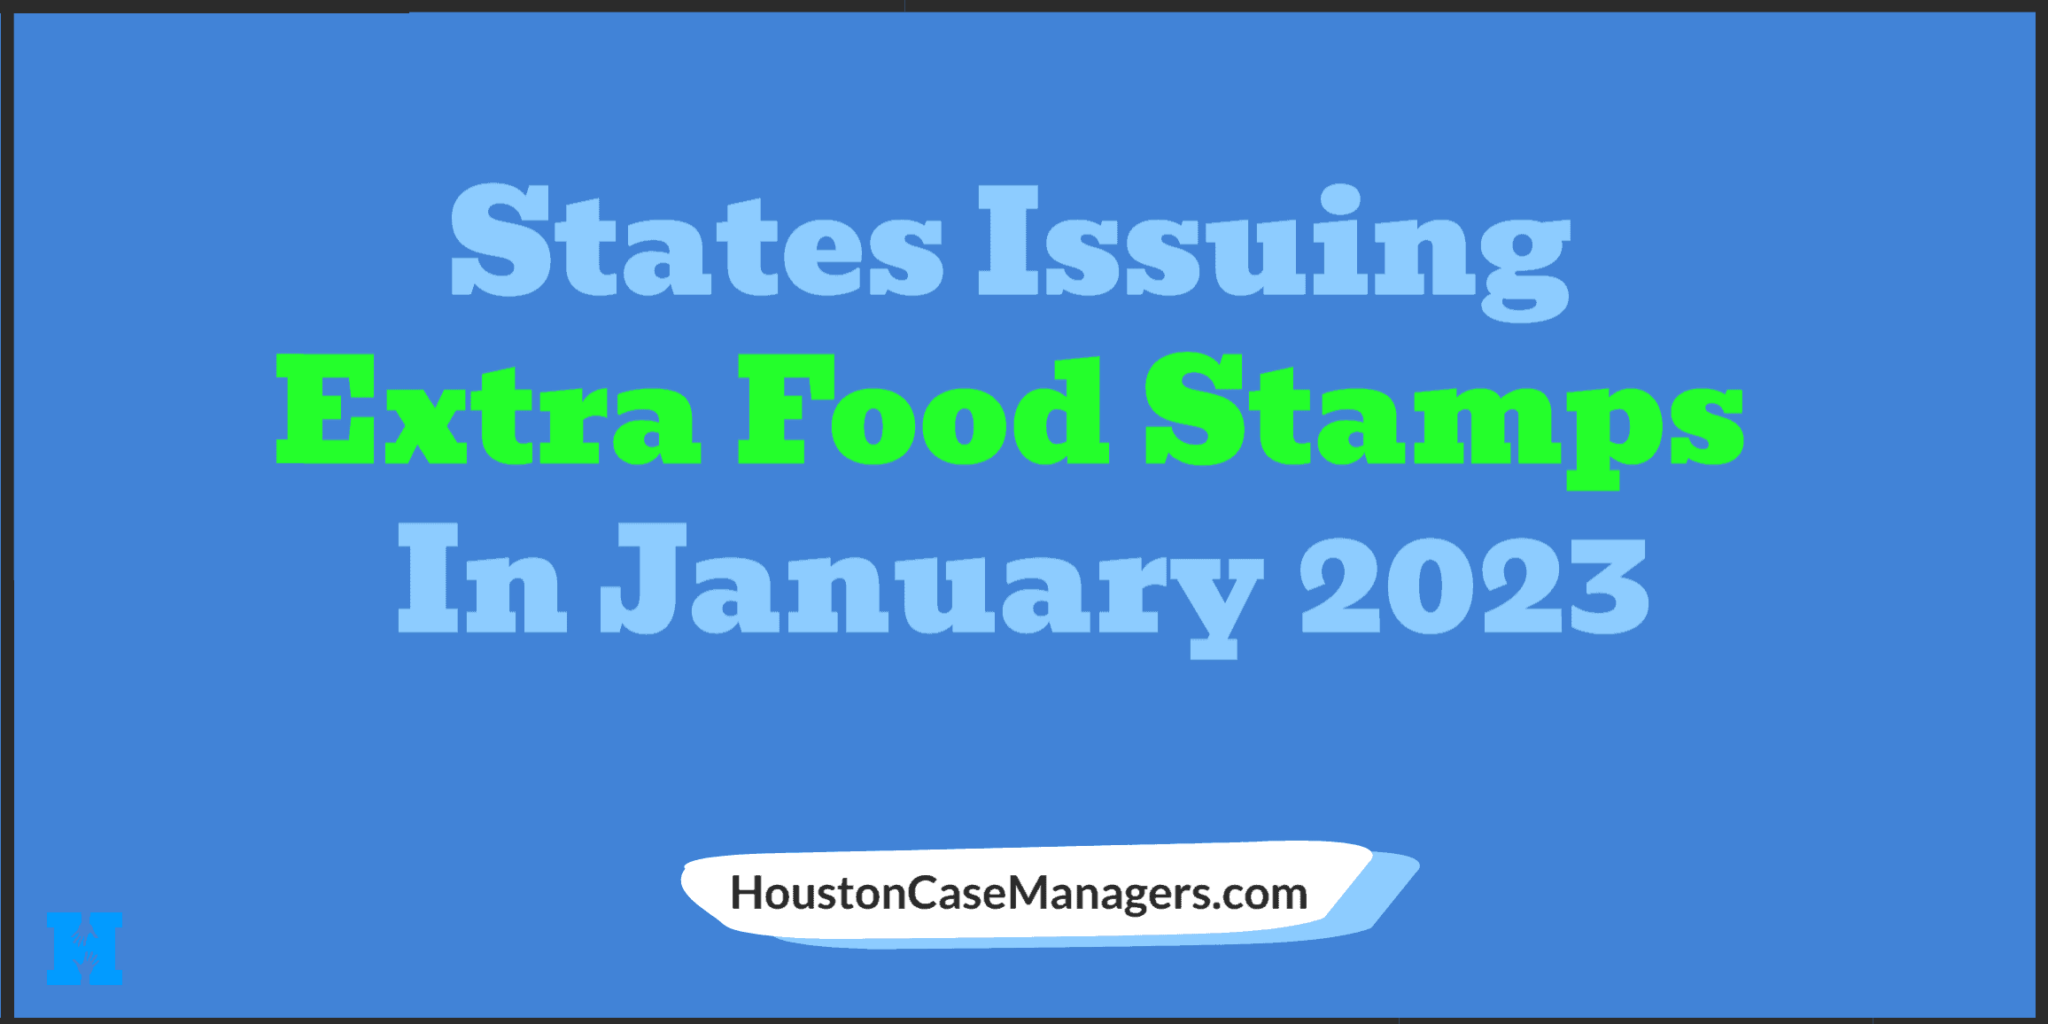 29 States Issuing Extra Food Stamps In January 2023